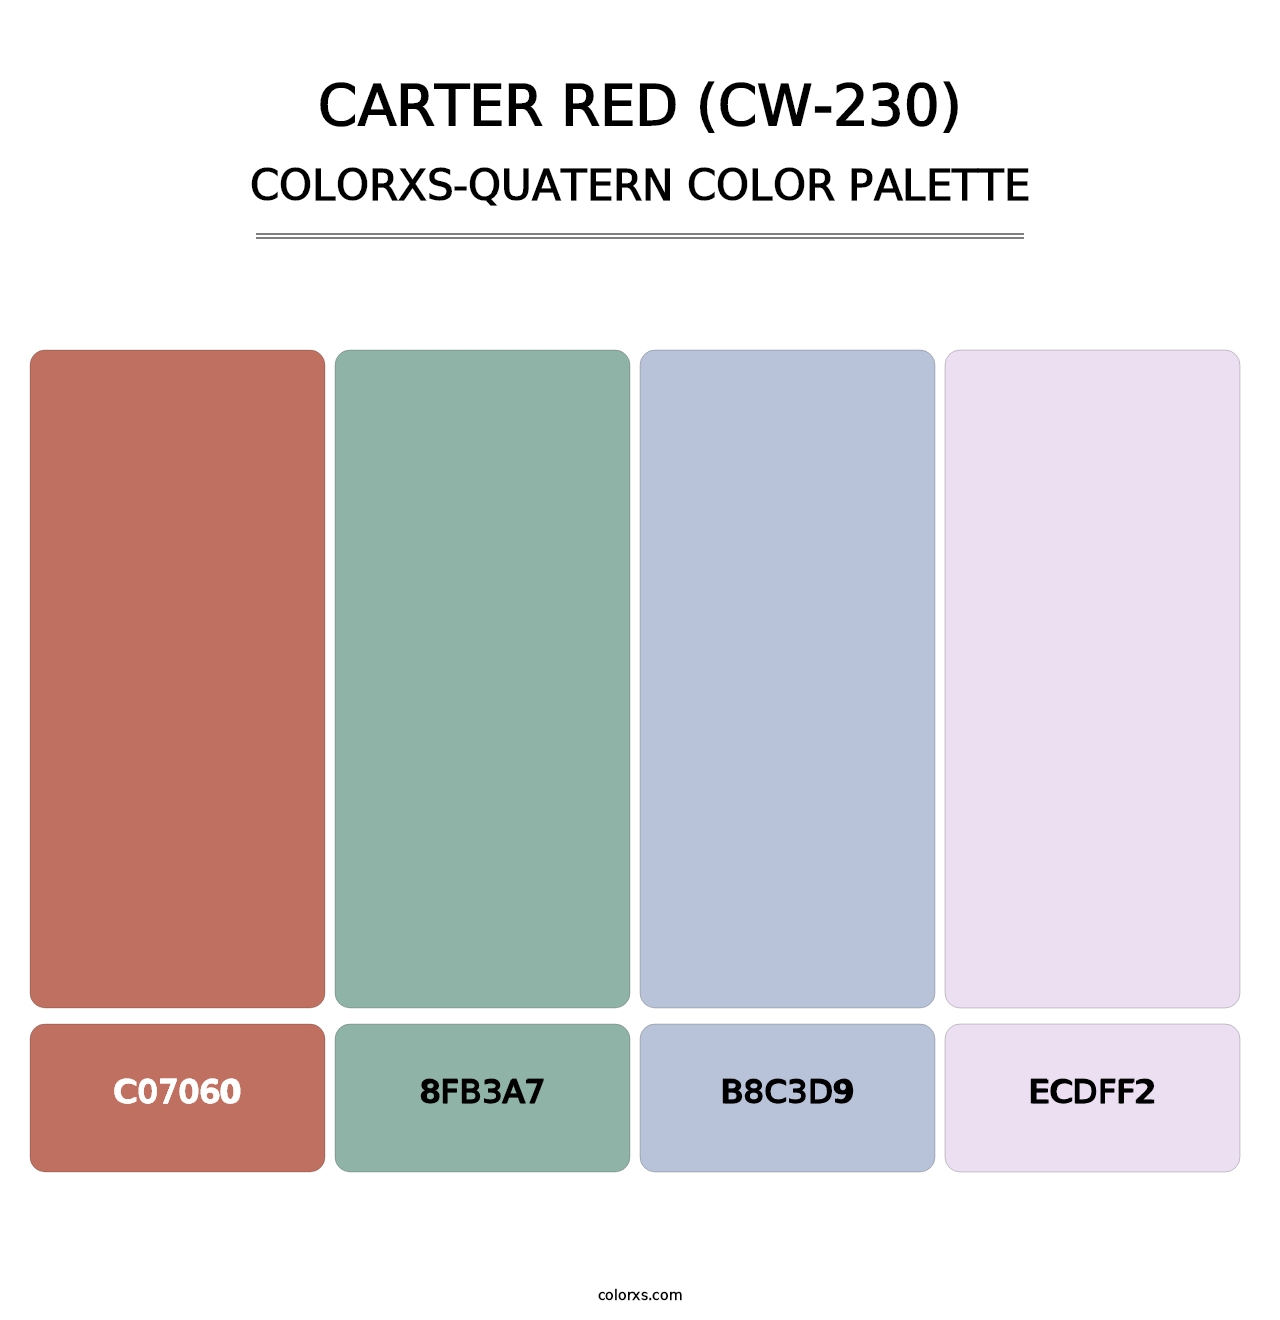 Carter Red (CW-230) - Colorxs Quatern Palette